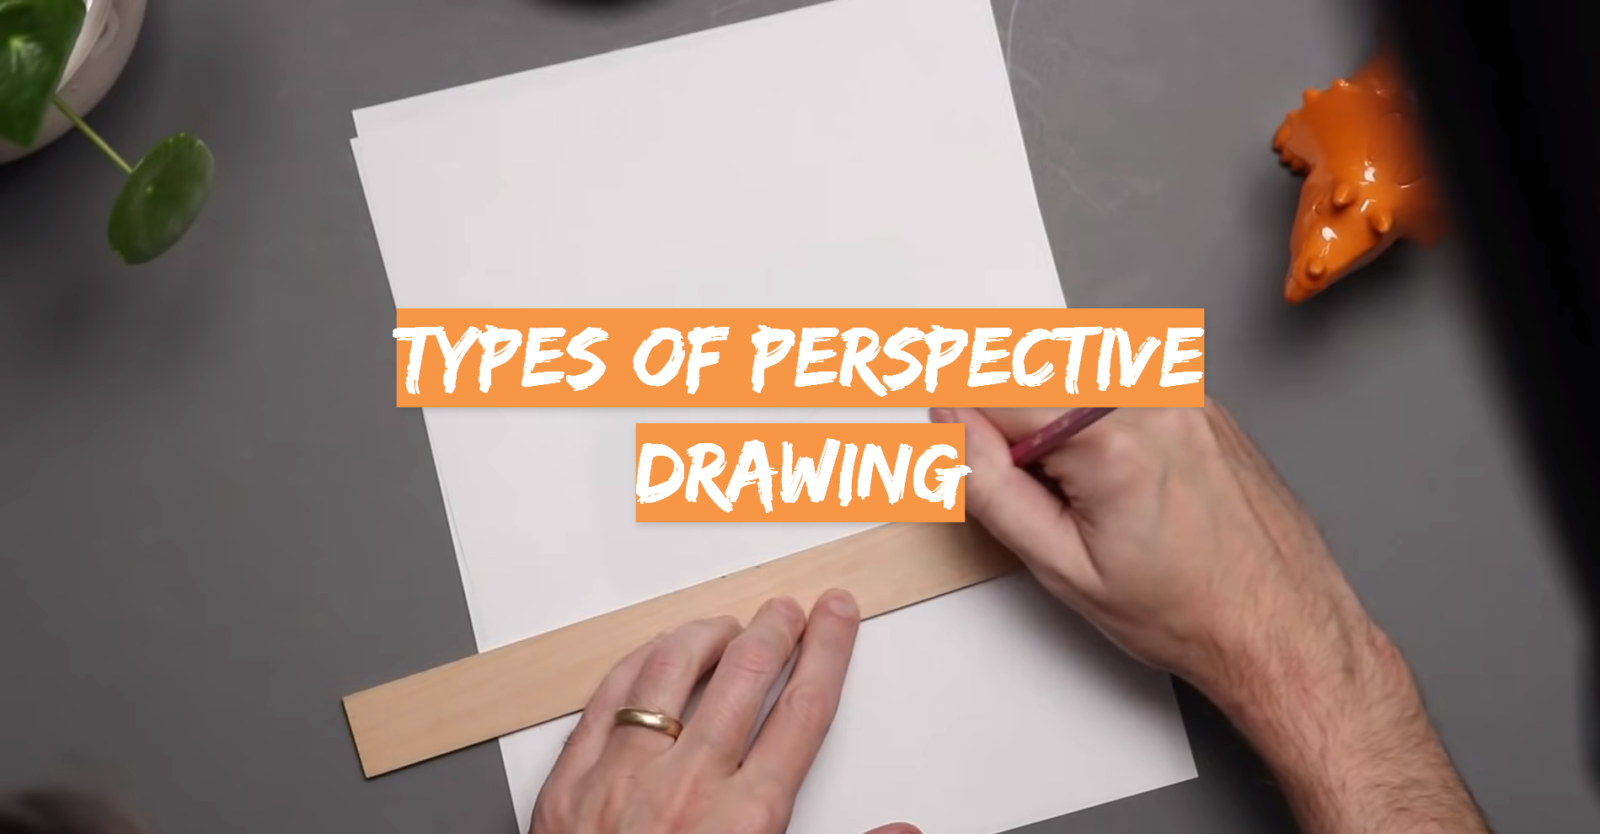 Types of Perspective Drawing